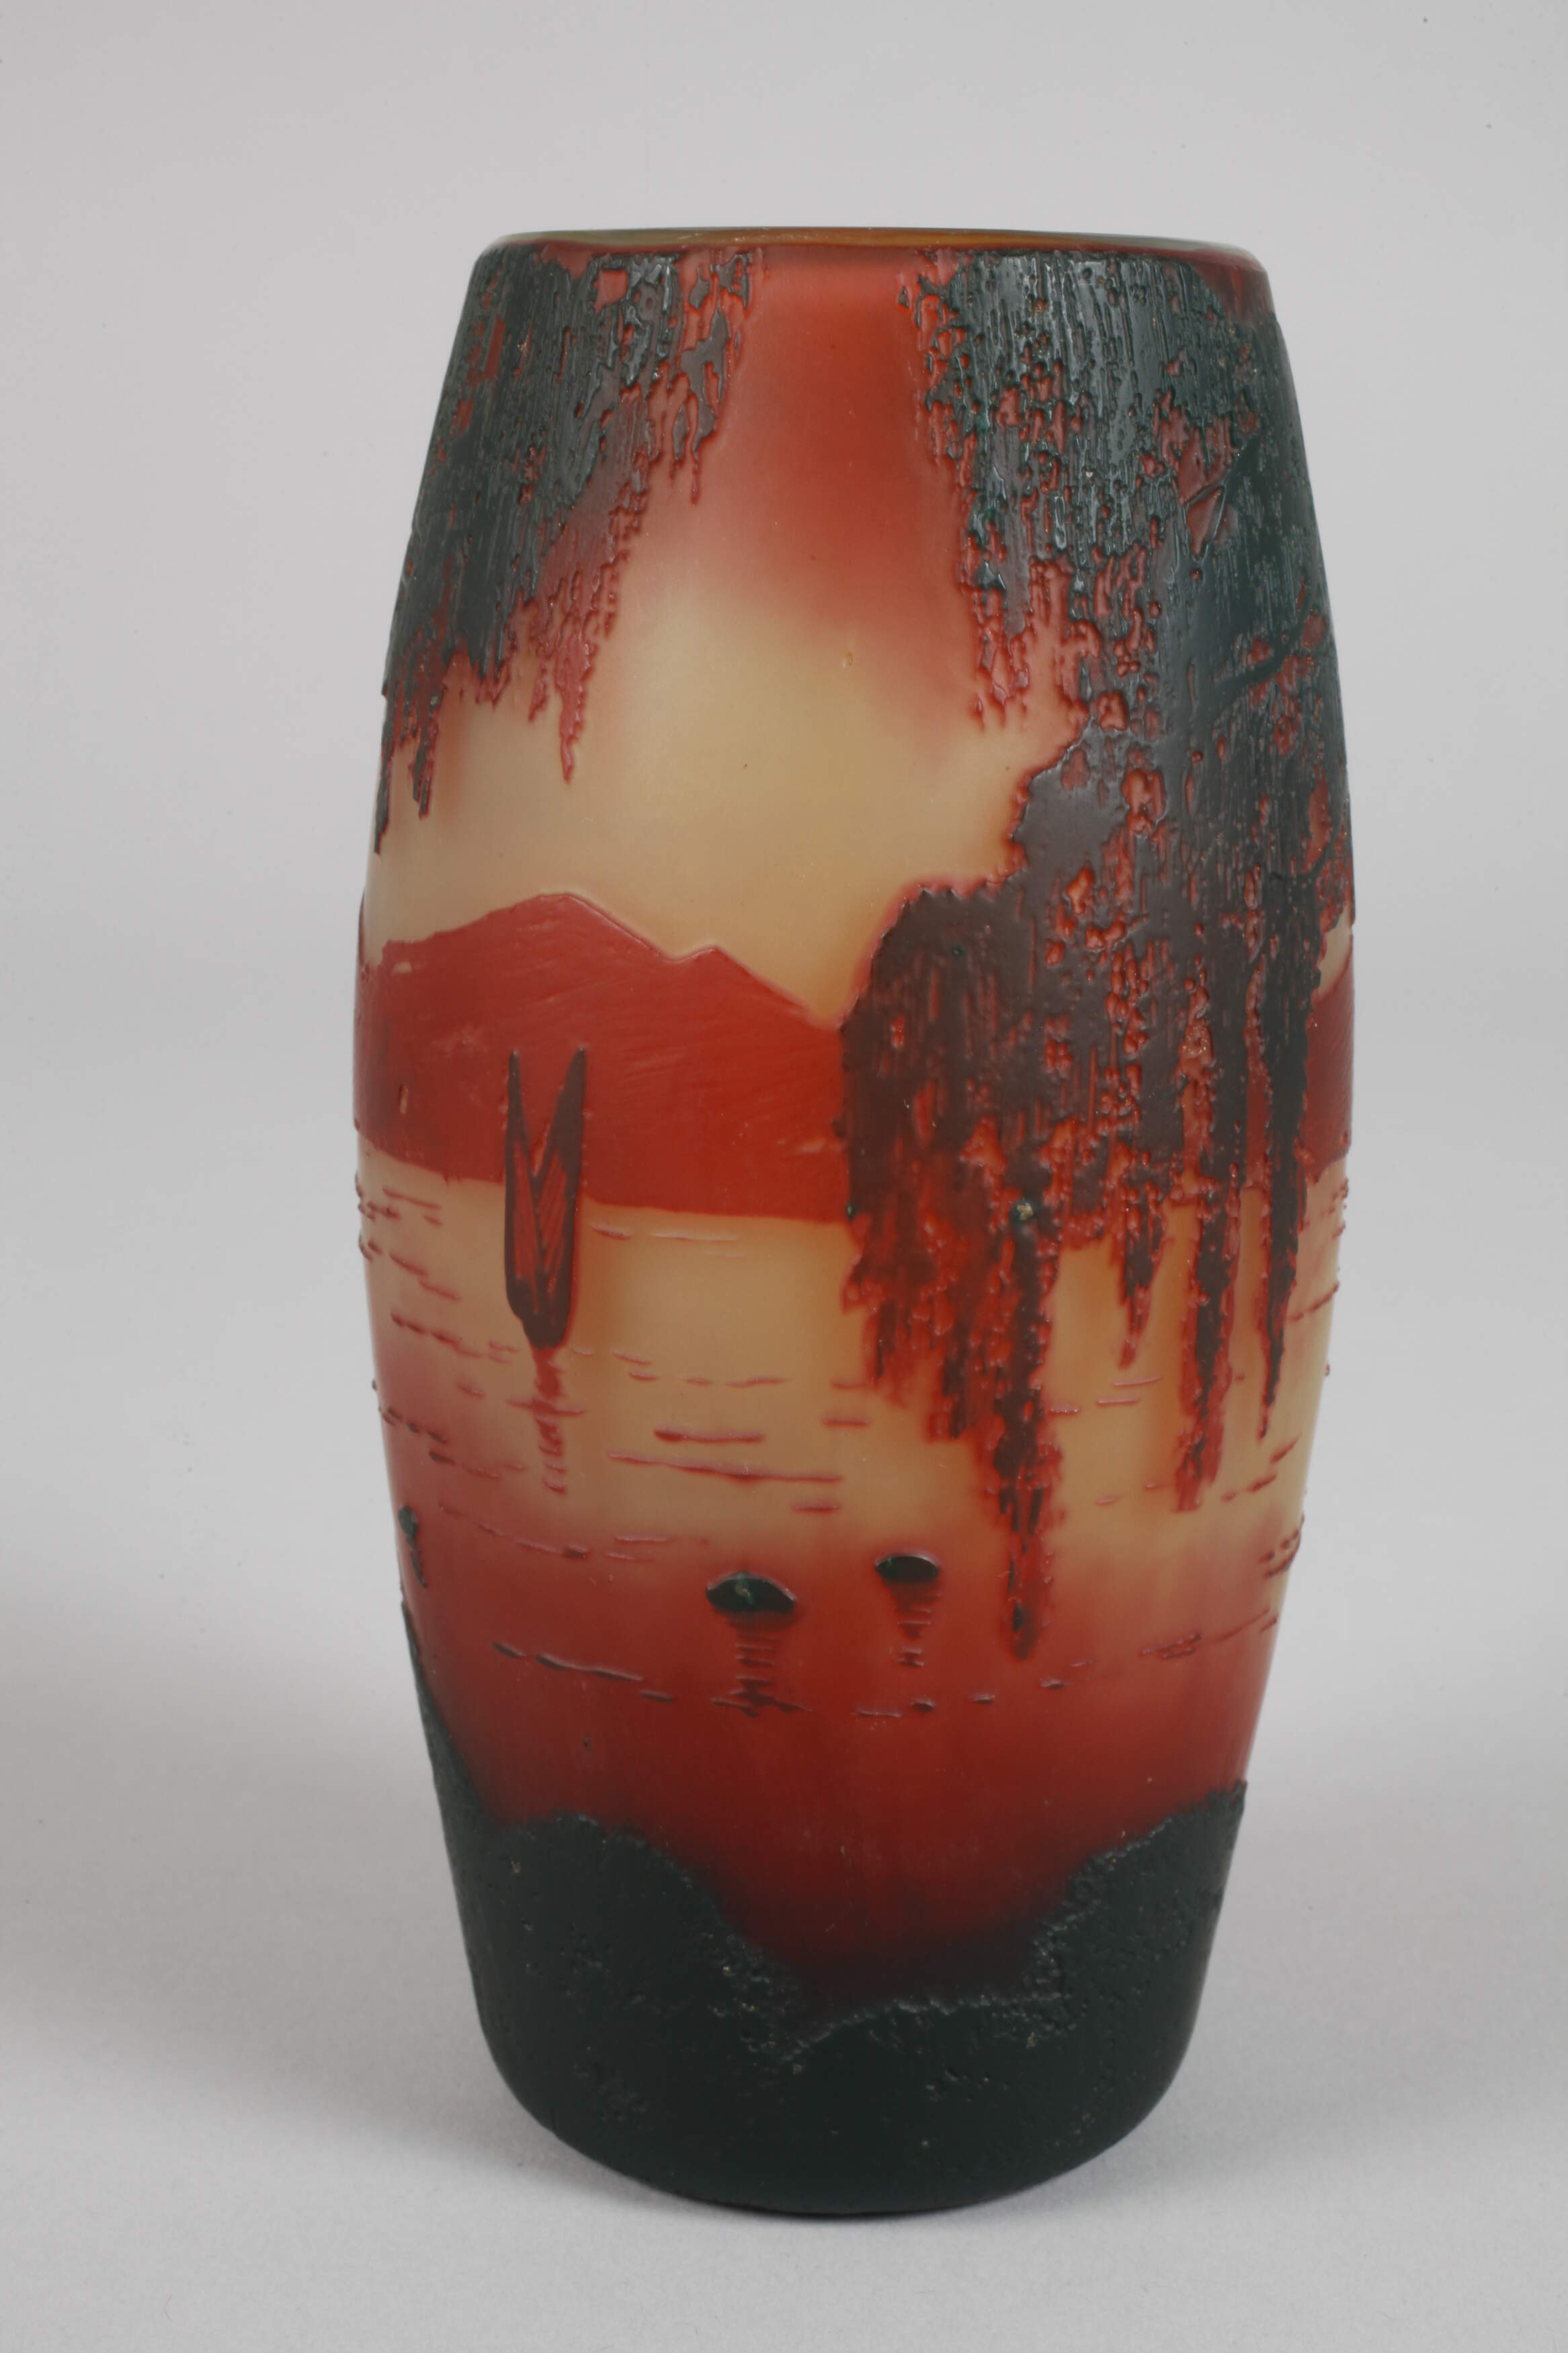 French etched glass vase with sailing boat - Image 3 of 5